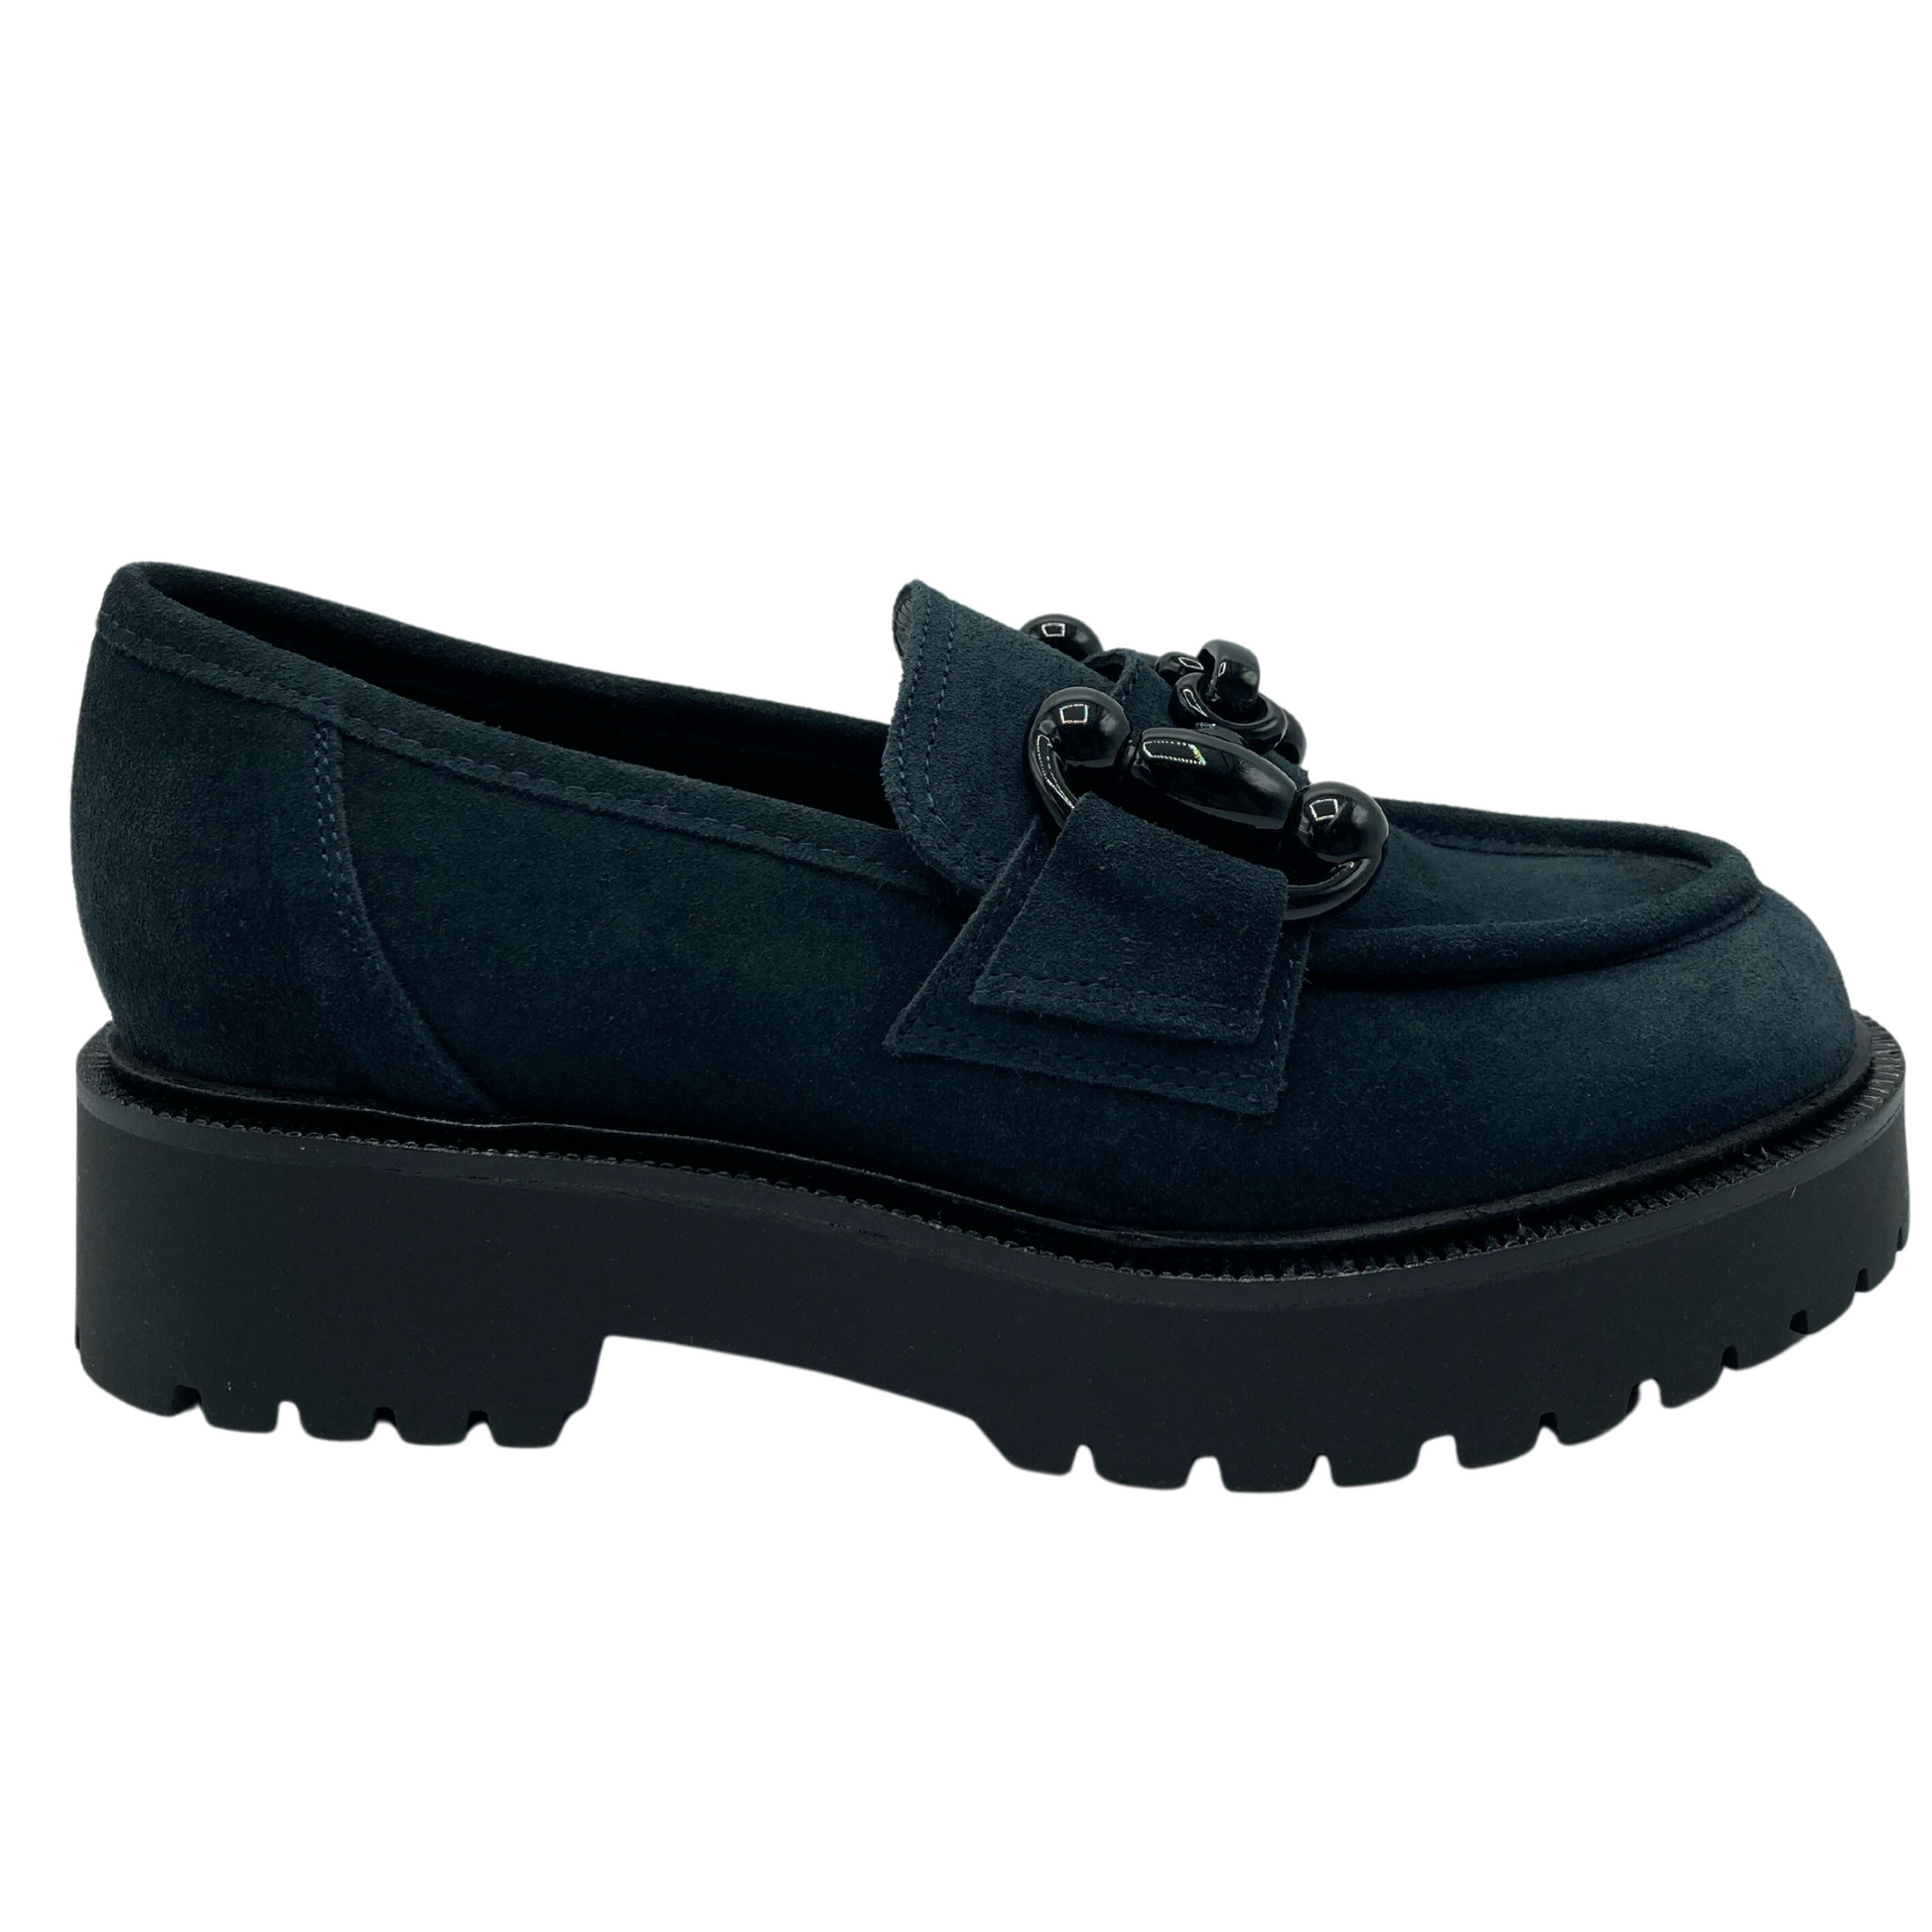 Right facing view of navy suede loafer with black lug sole, leather lining and black buckle detail on upper